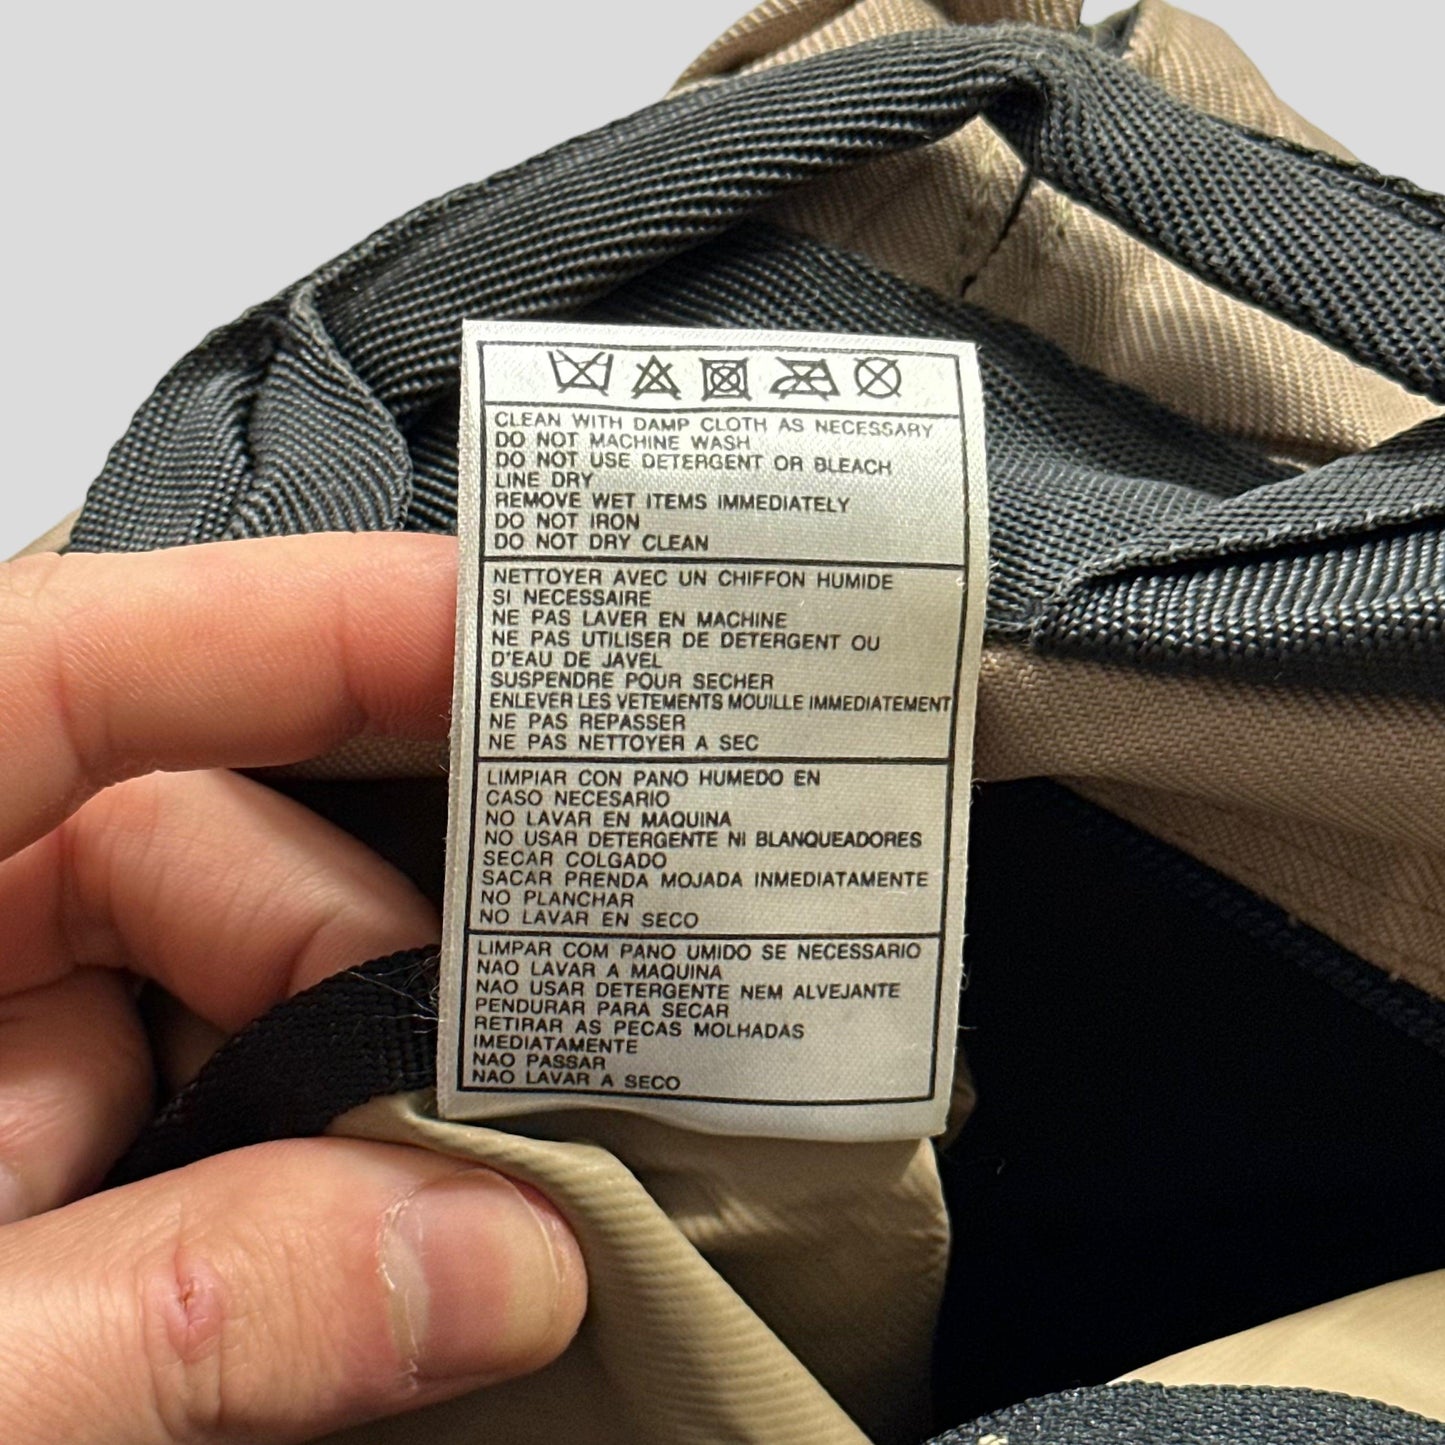 Nike SS99 Multipocket Drybag Sling - Known Source